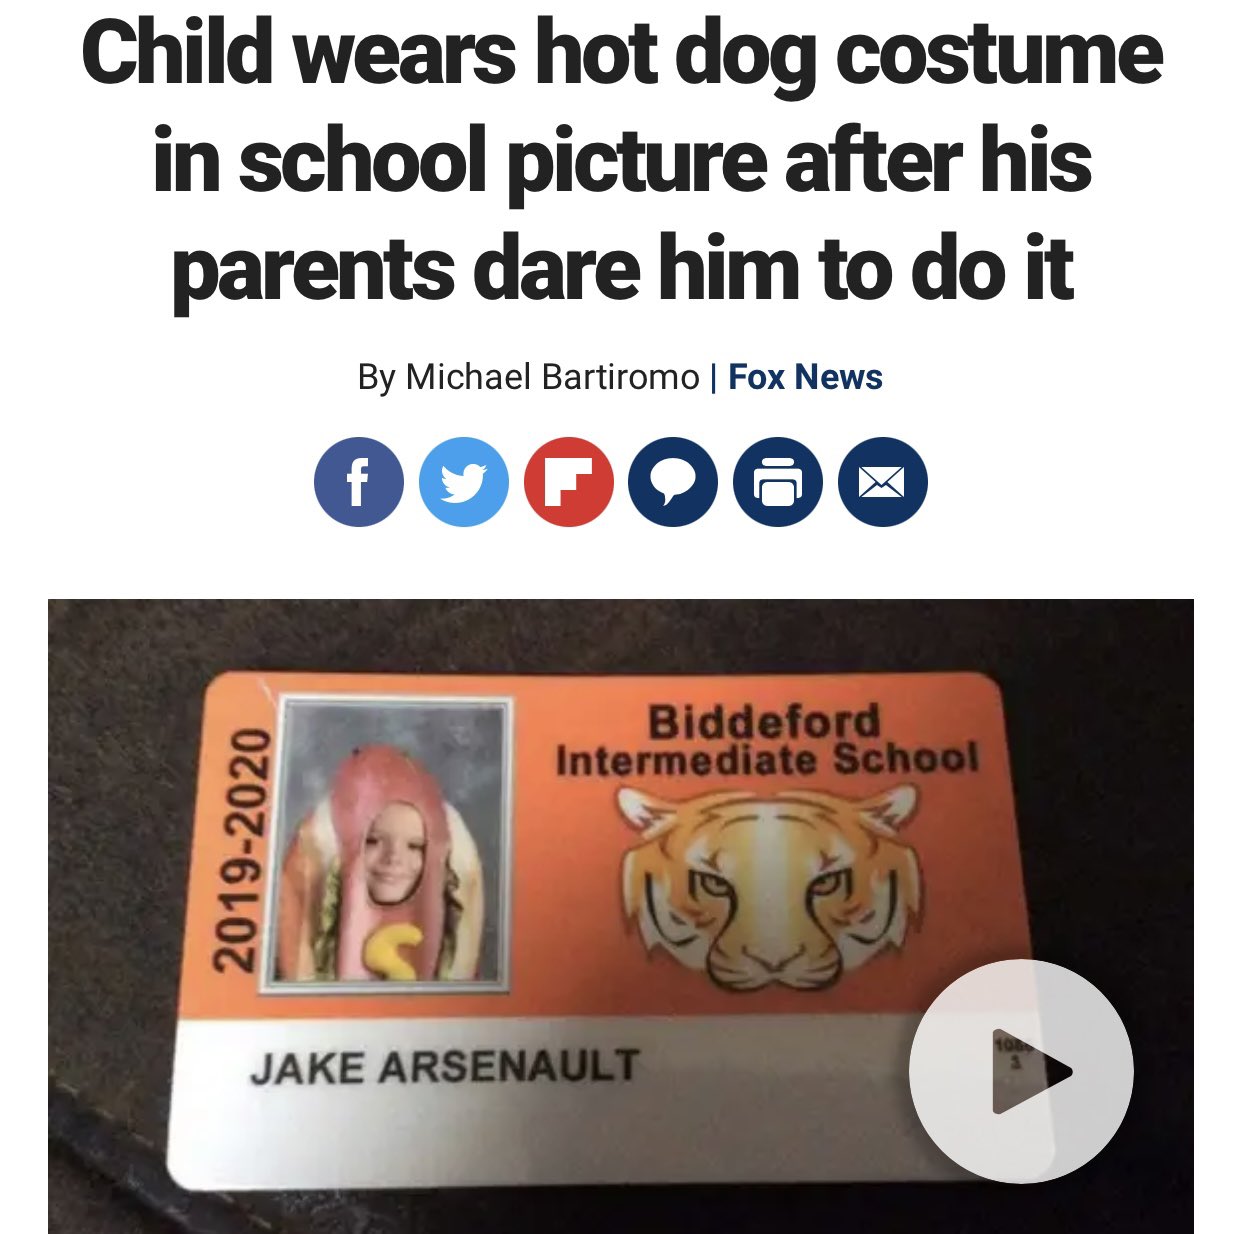 dudes posting their Ws - media - Child wears hot dog costume in school picture after his parents dare him to do it 20192020 By Michael Bartiromo | Fox News Foo f va Biddeford Intermediate School Jake Arsenault